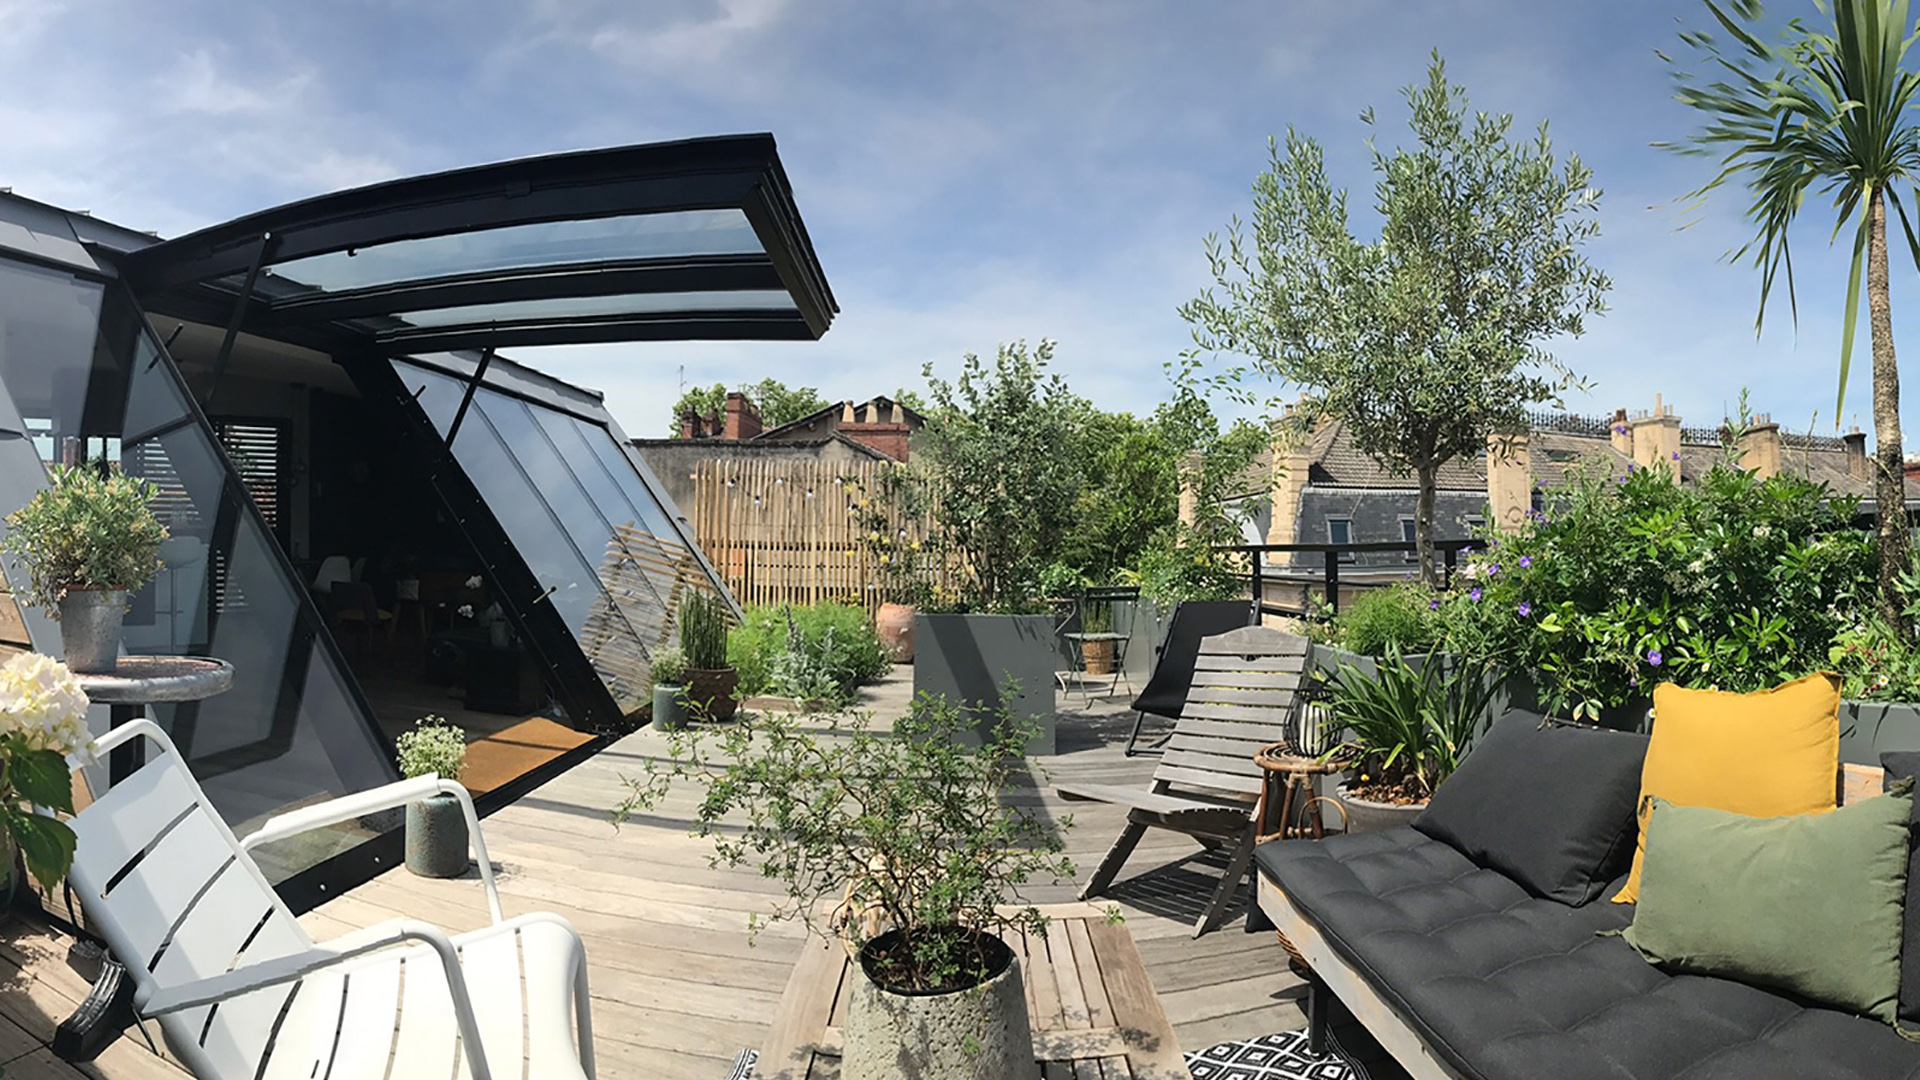 Seuil-architecture-renovation-terrasse-toulouse-1-slid